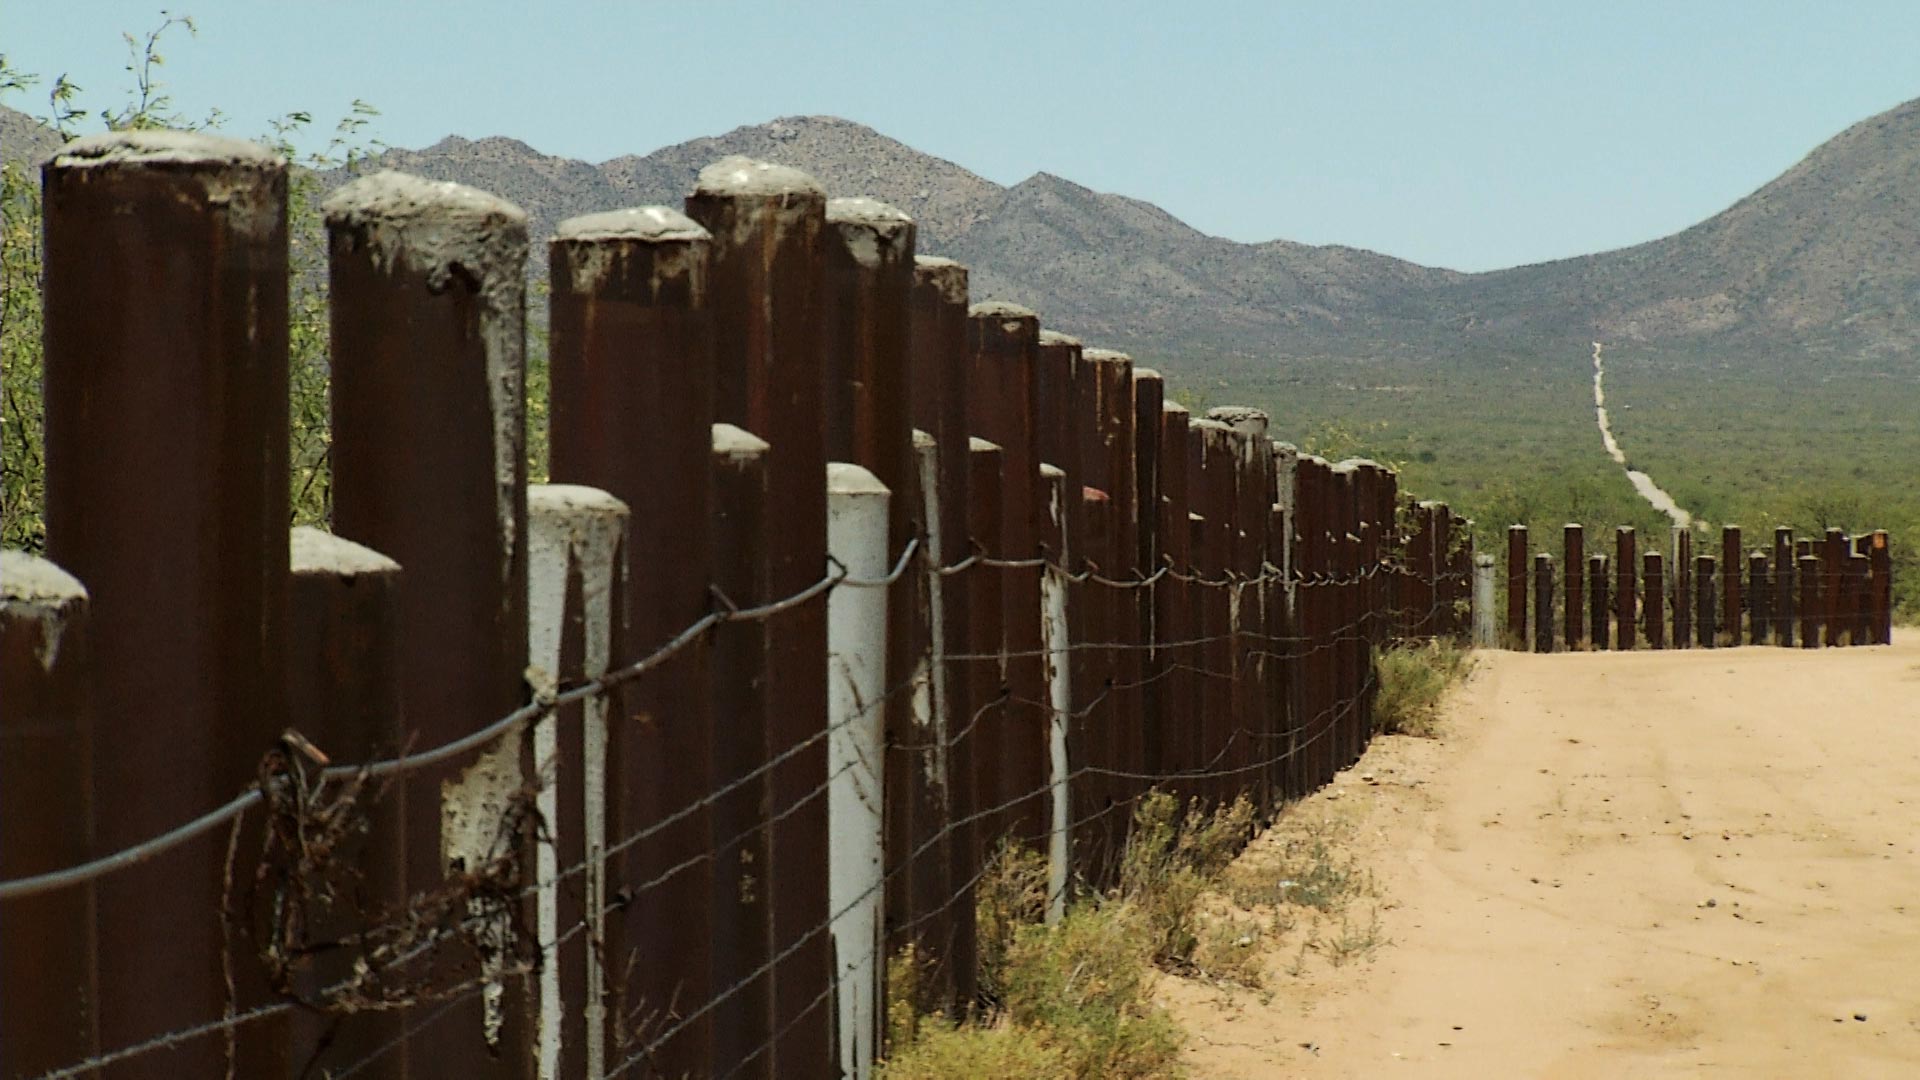 Agreement reached to build border surveillance towers on Tohono O'odham land